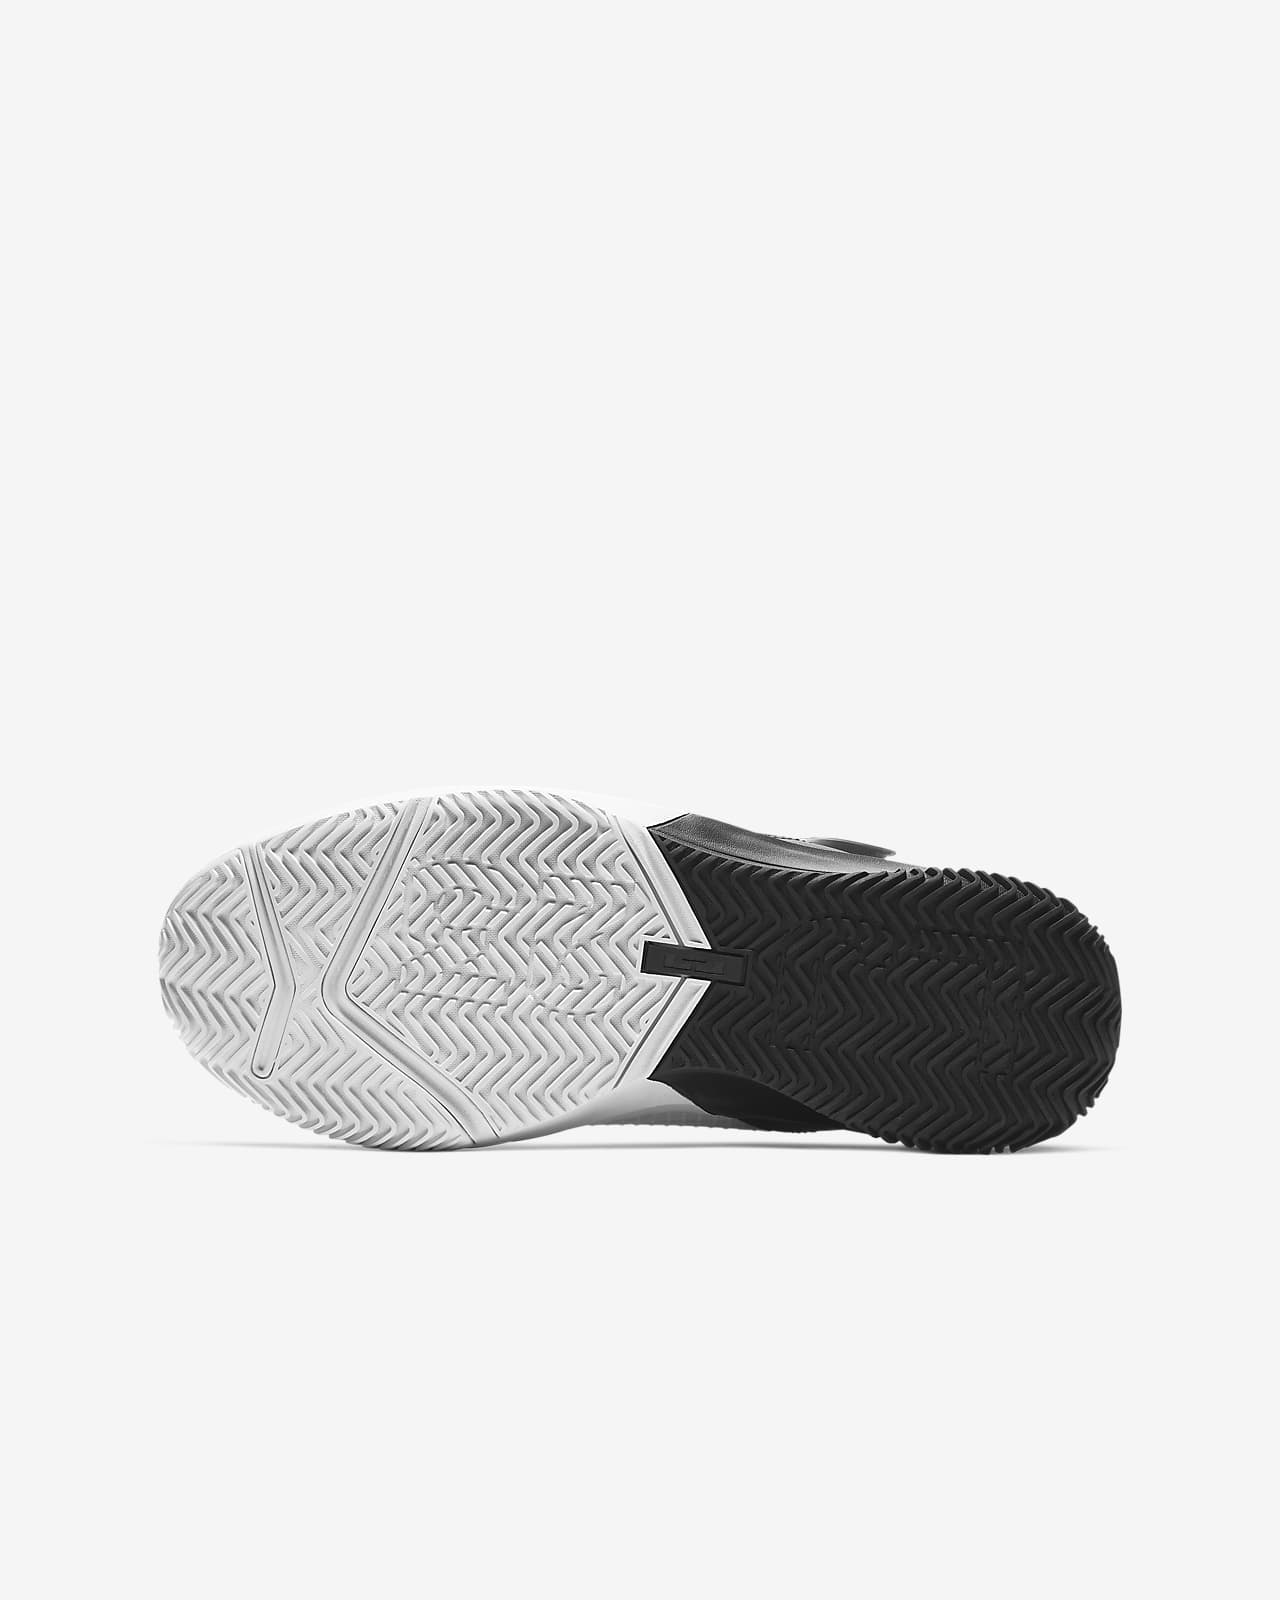 lebron soldier 13 flyease black and white